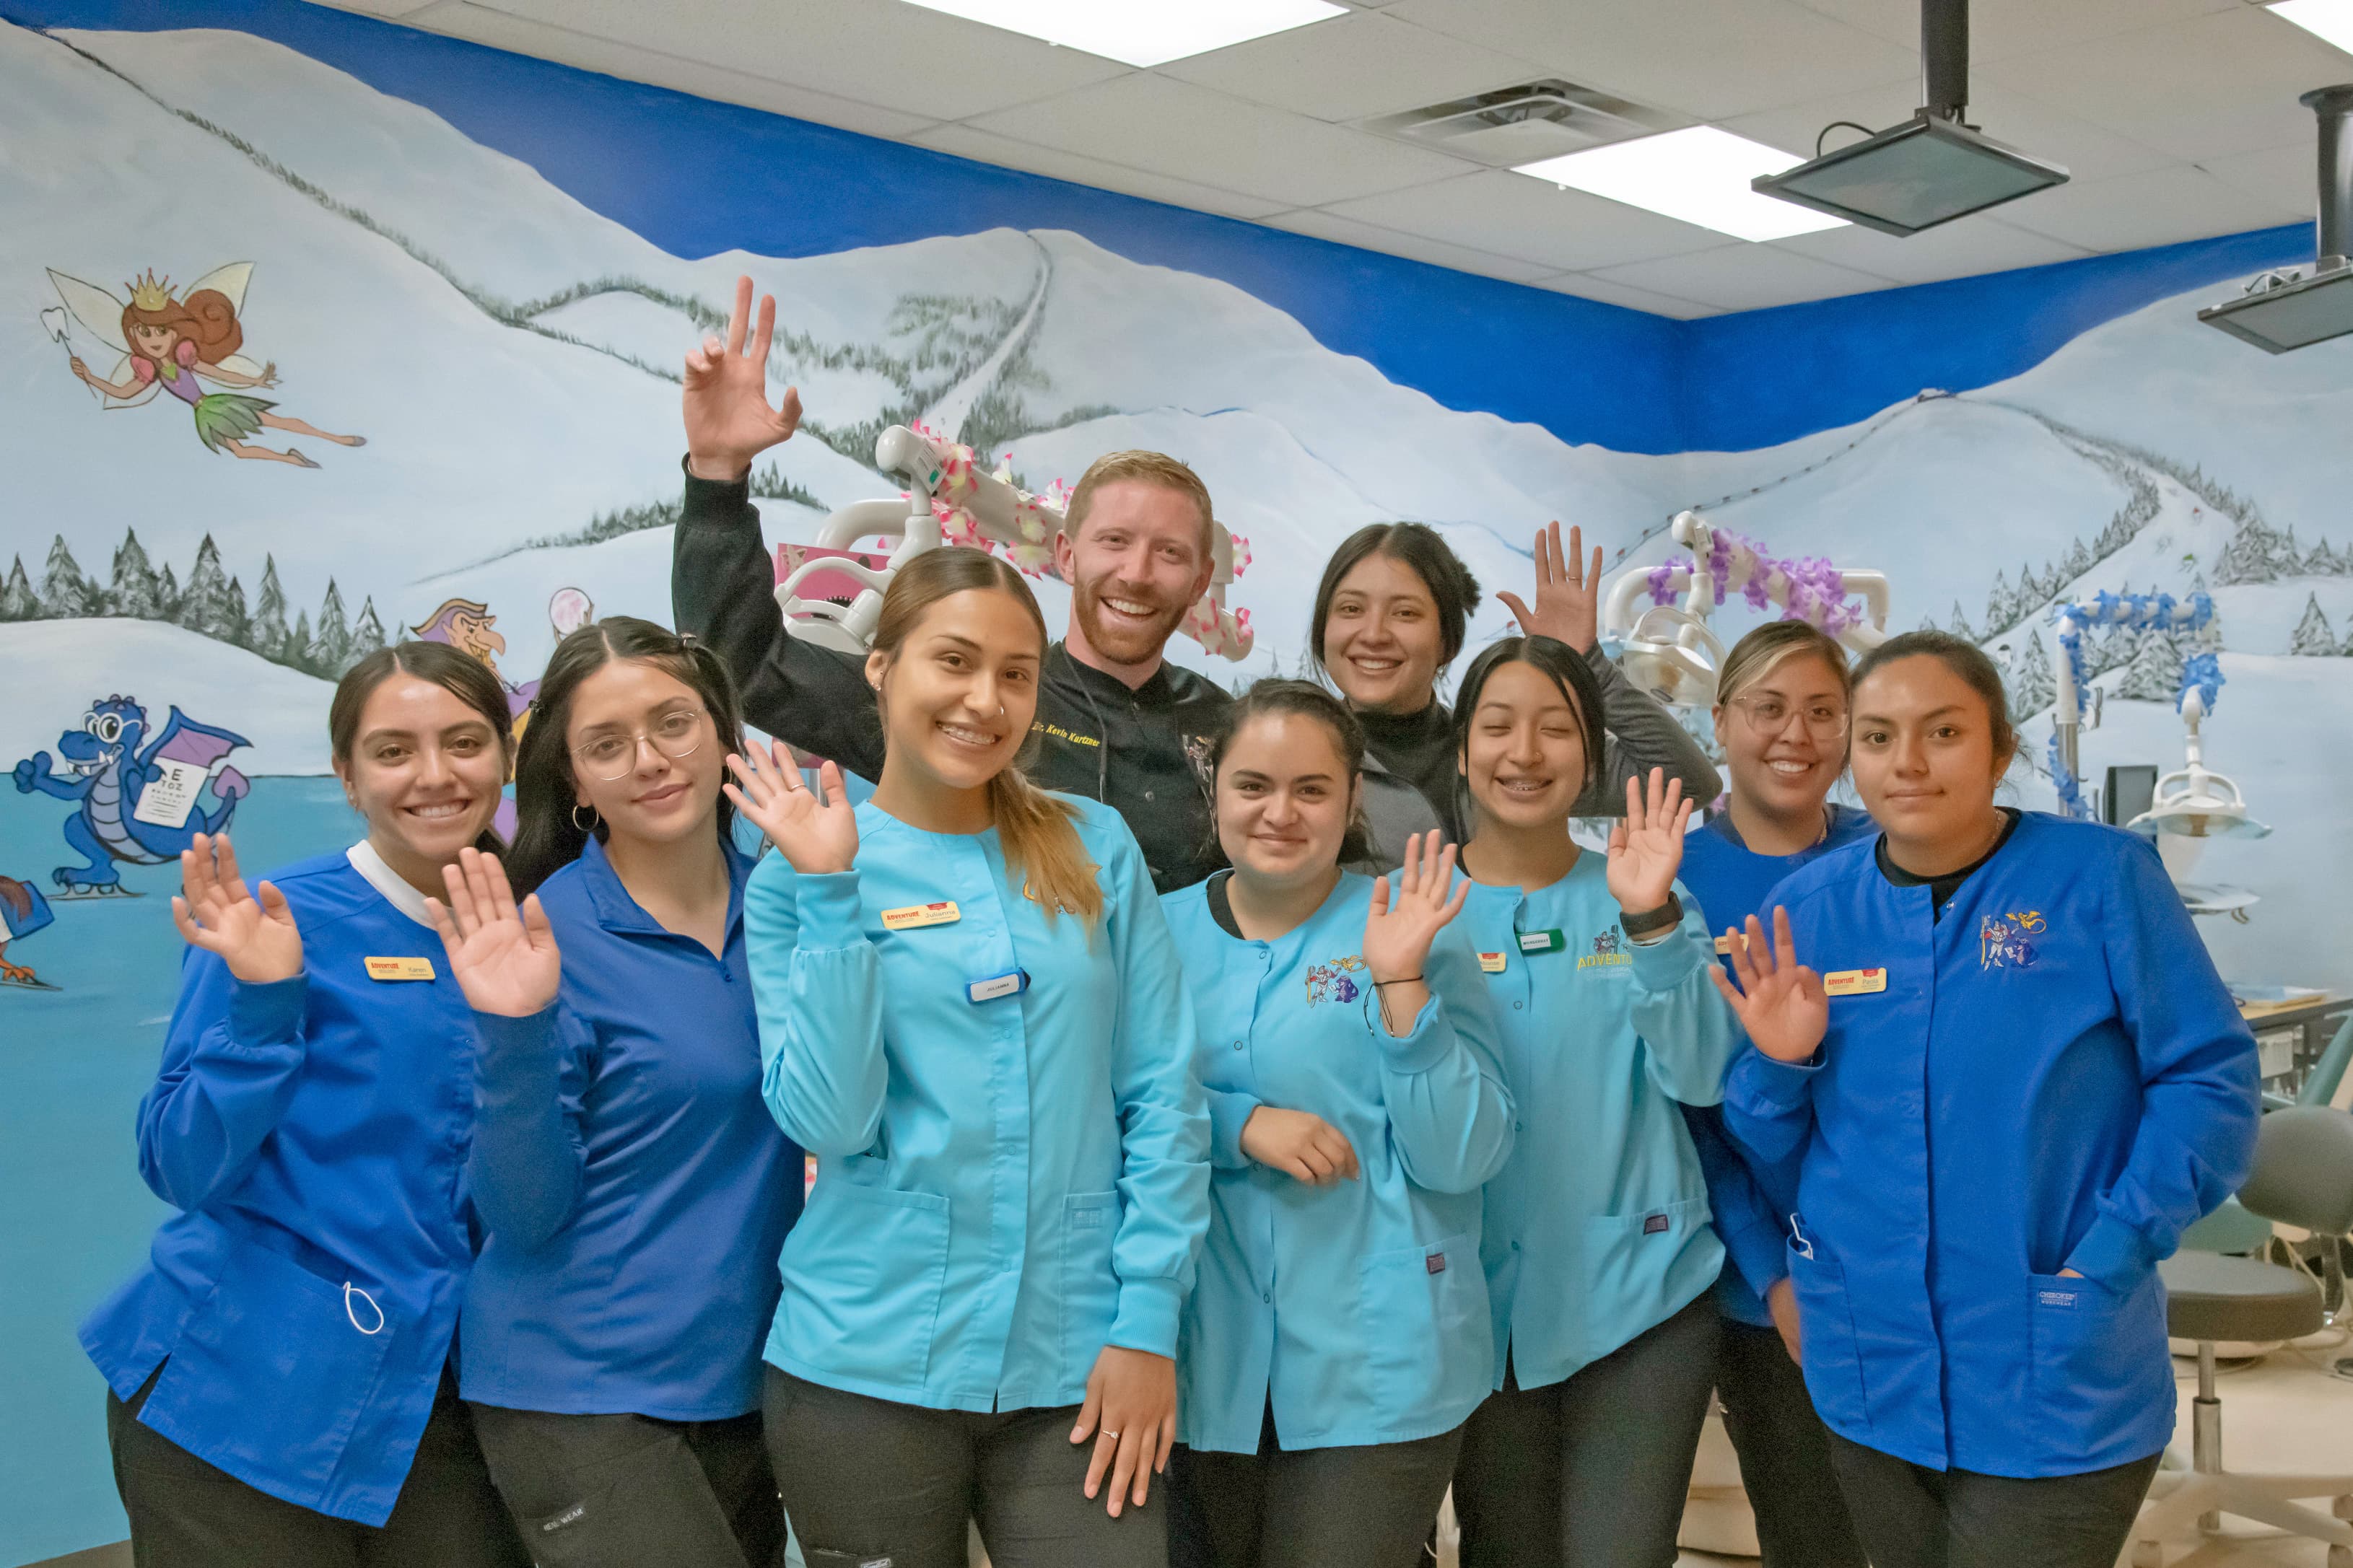 ten people wearing blue medical scrubs at a dental office waving and smiling